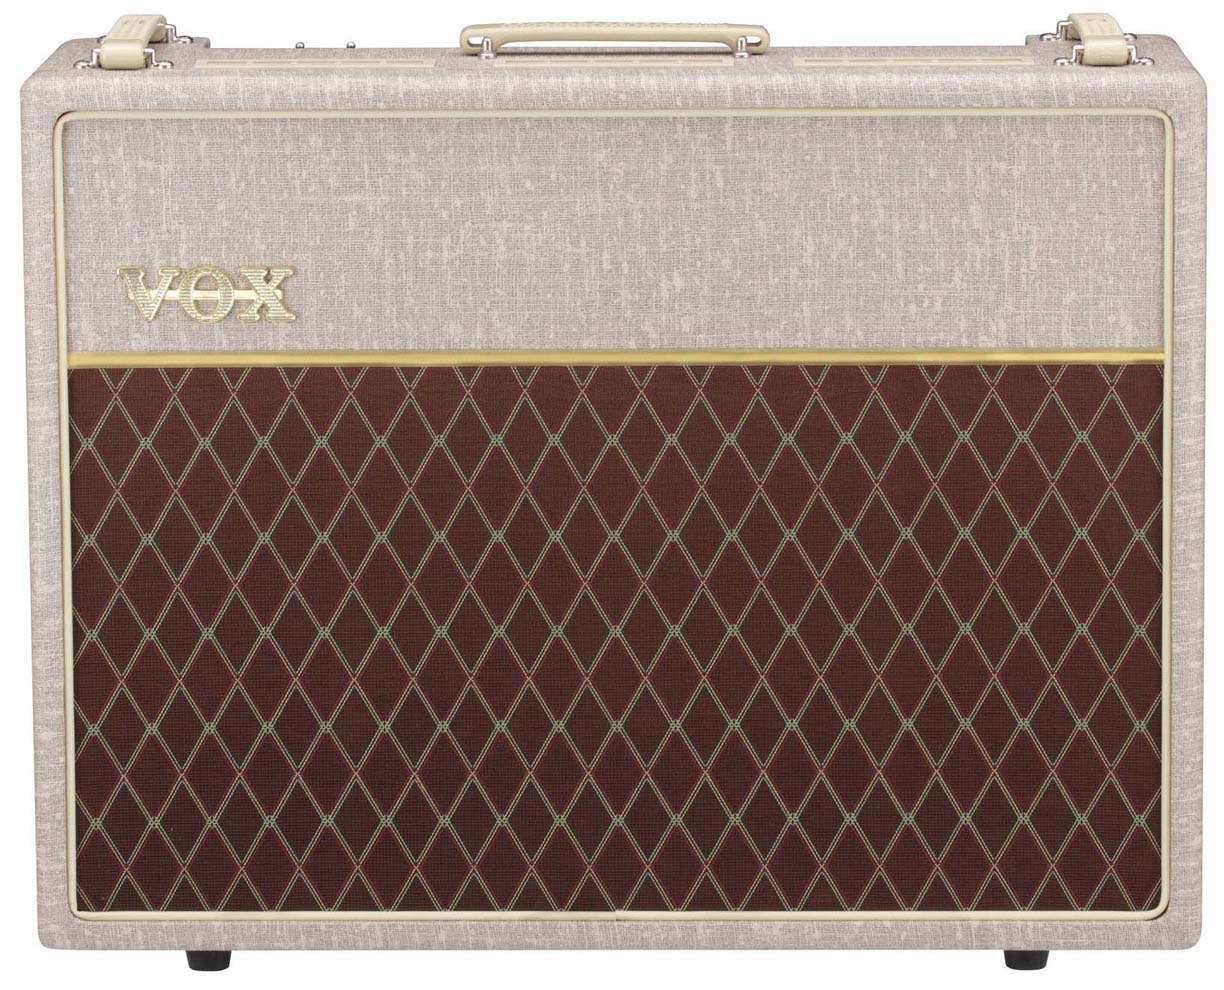 Vox Vox AC-30HW2 Hand-Wired Guitar Combo Amp (30 Watts, 2x12 in.)